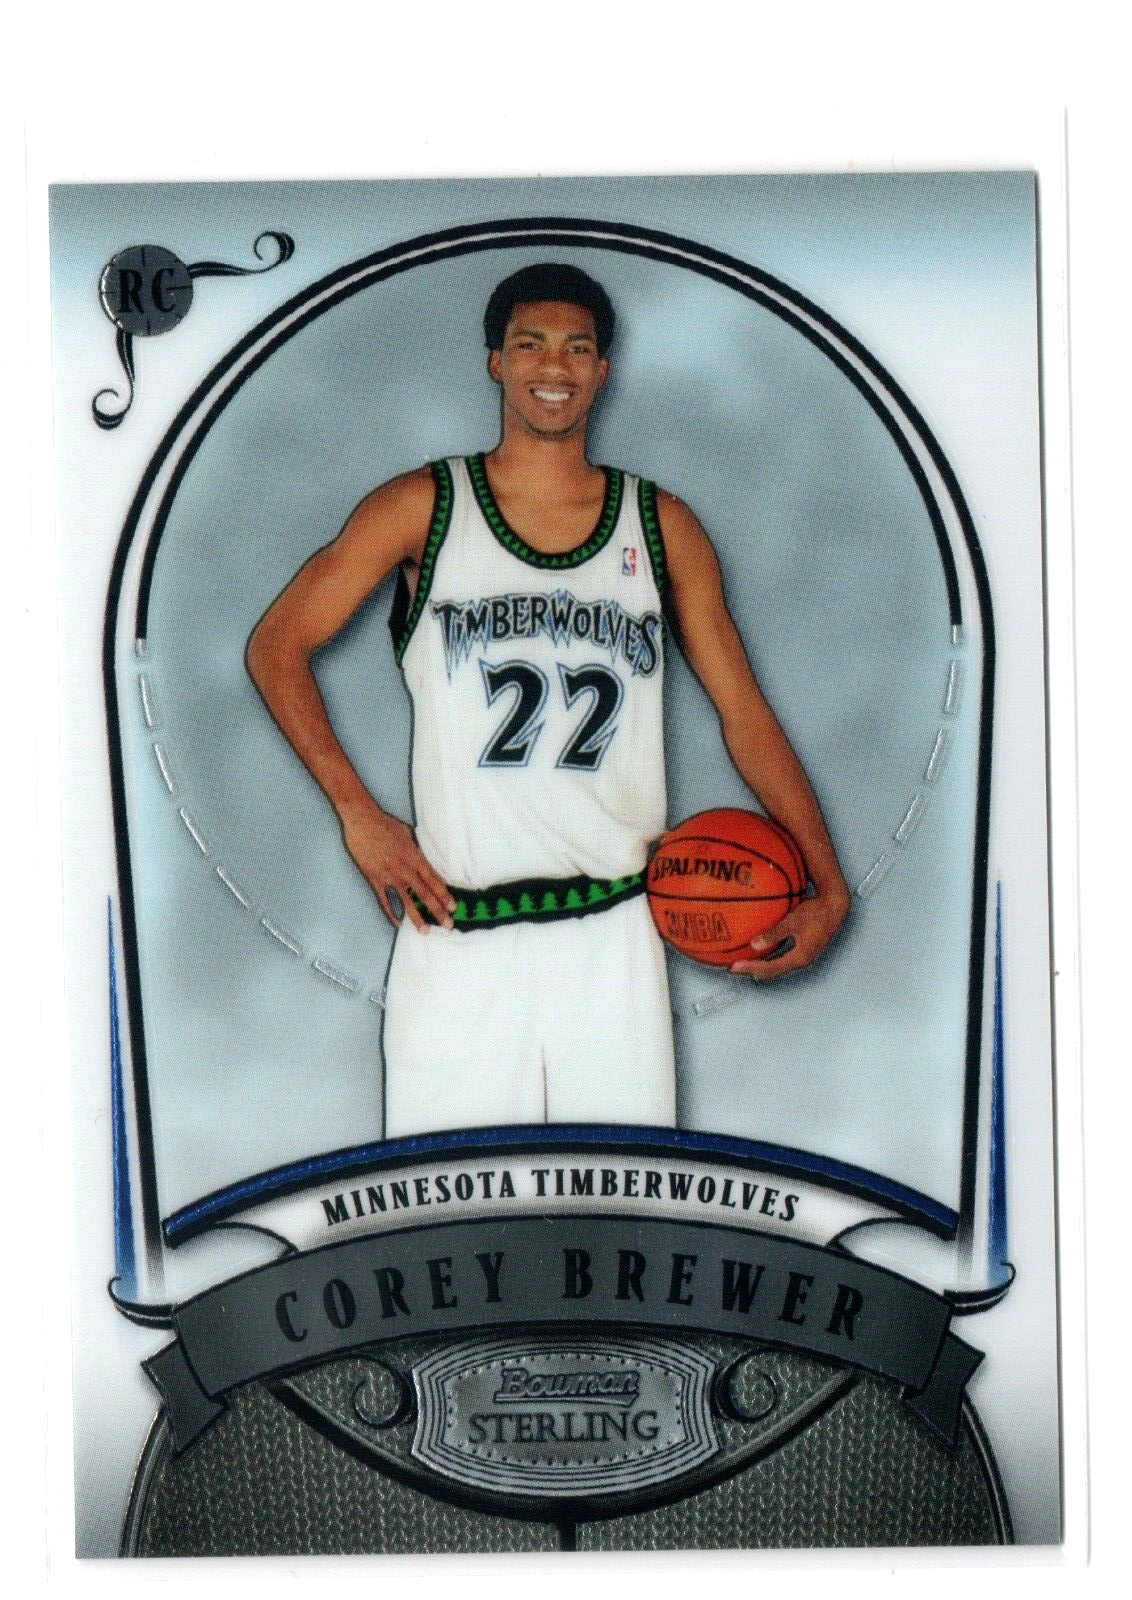 Primary image for 2007-08 Bowman Sterling Timberwolves Basketball Card #CB1 Corey Brewer Rookie